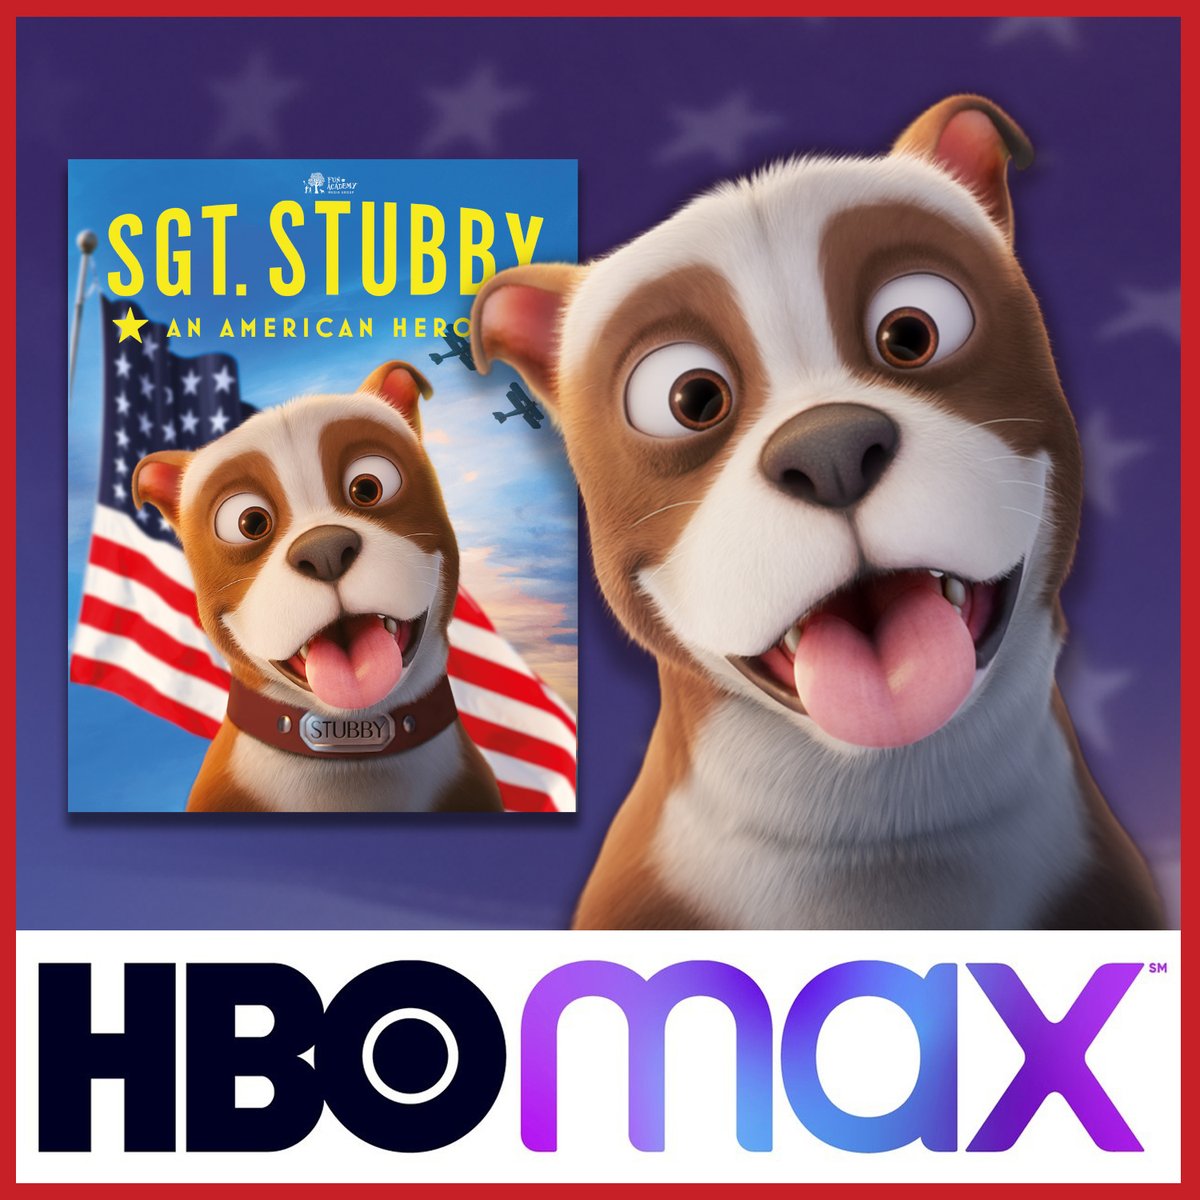 34 Top Pictures Sgt Stubby Movie Full Movie / Sgt Stubby An American Hero What You Need To Know About It